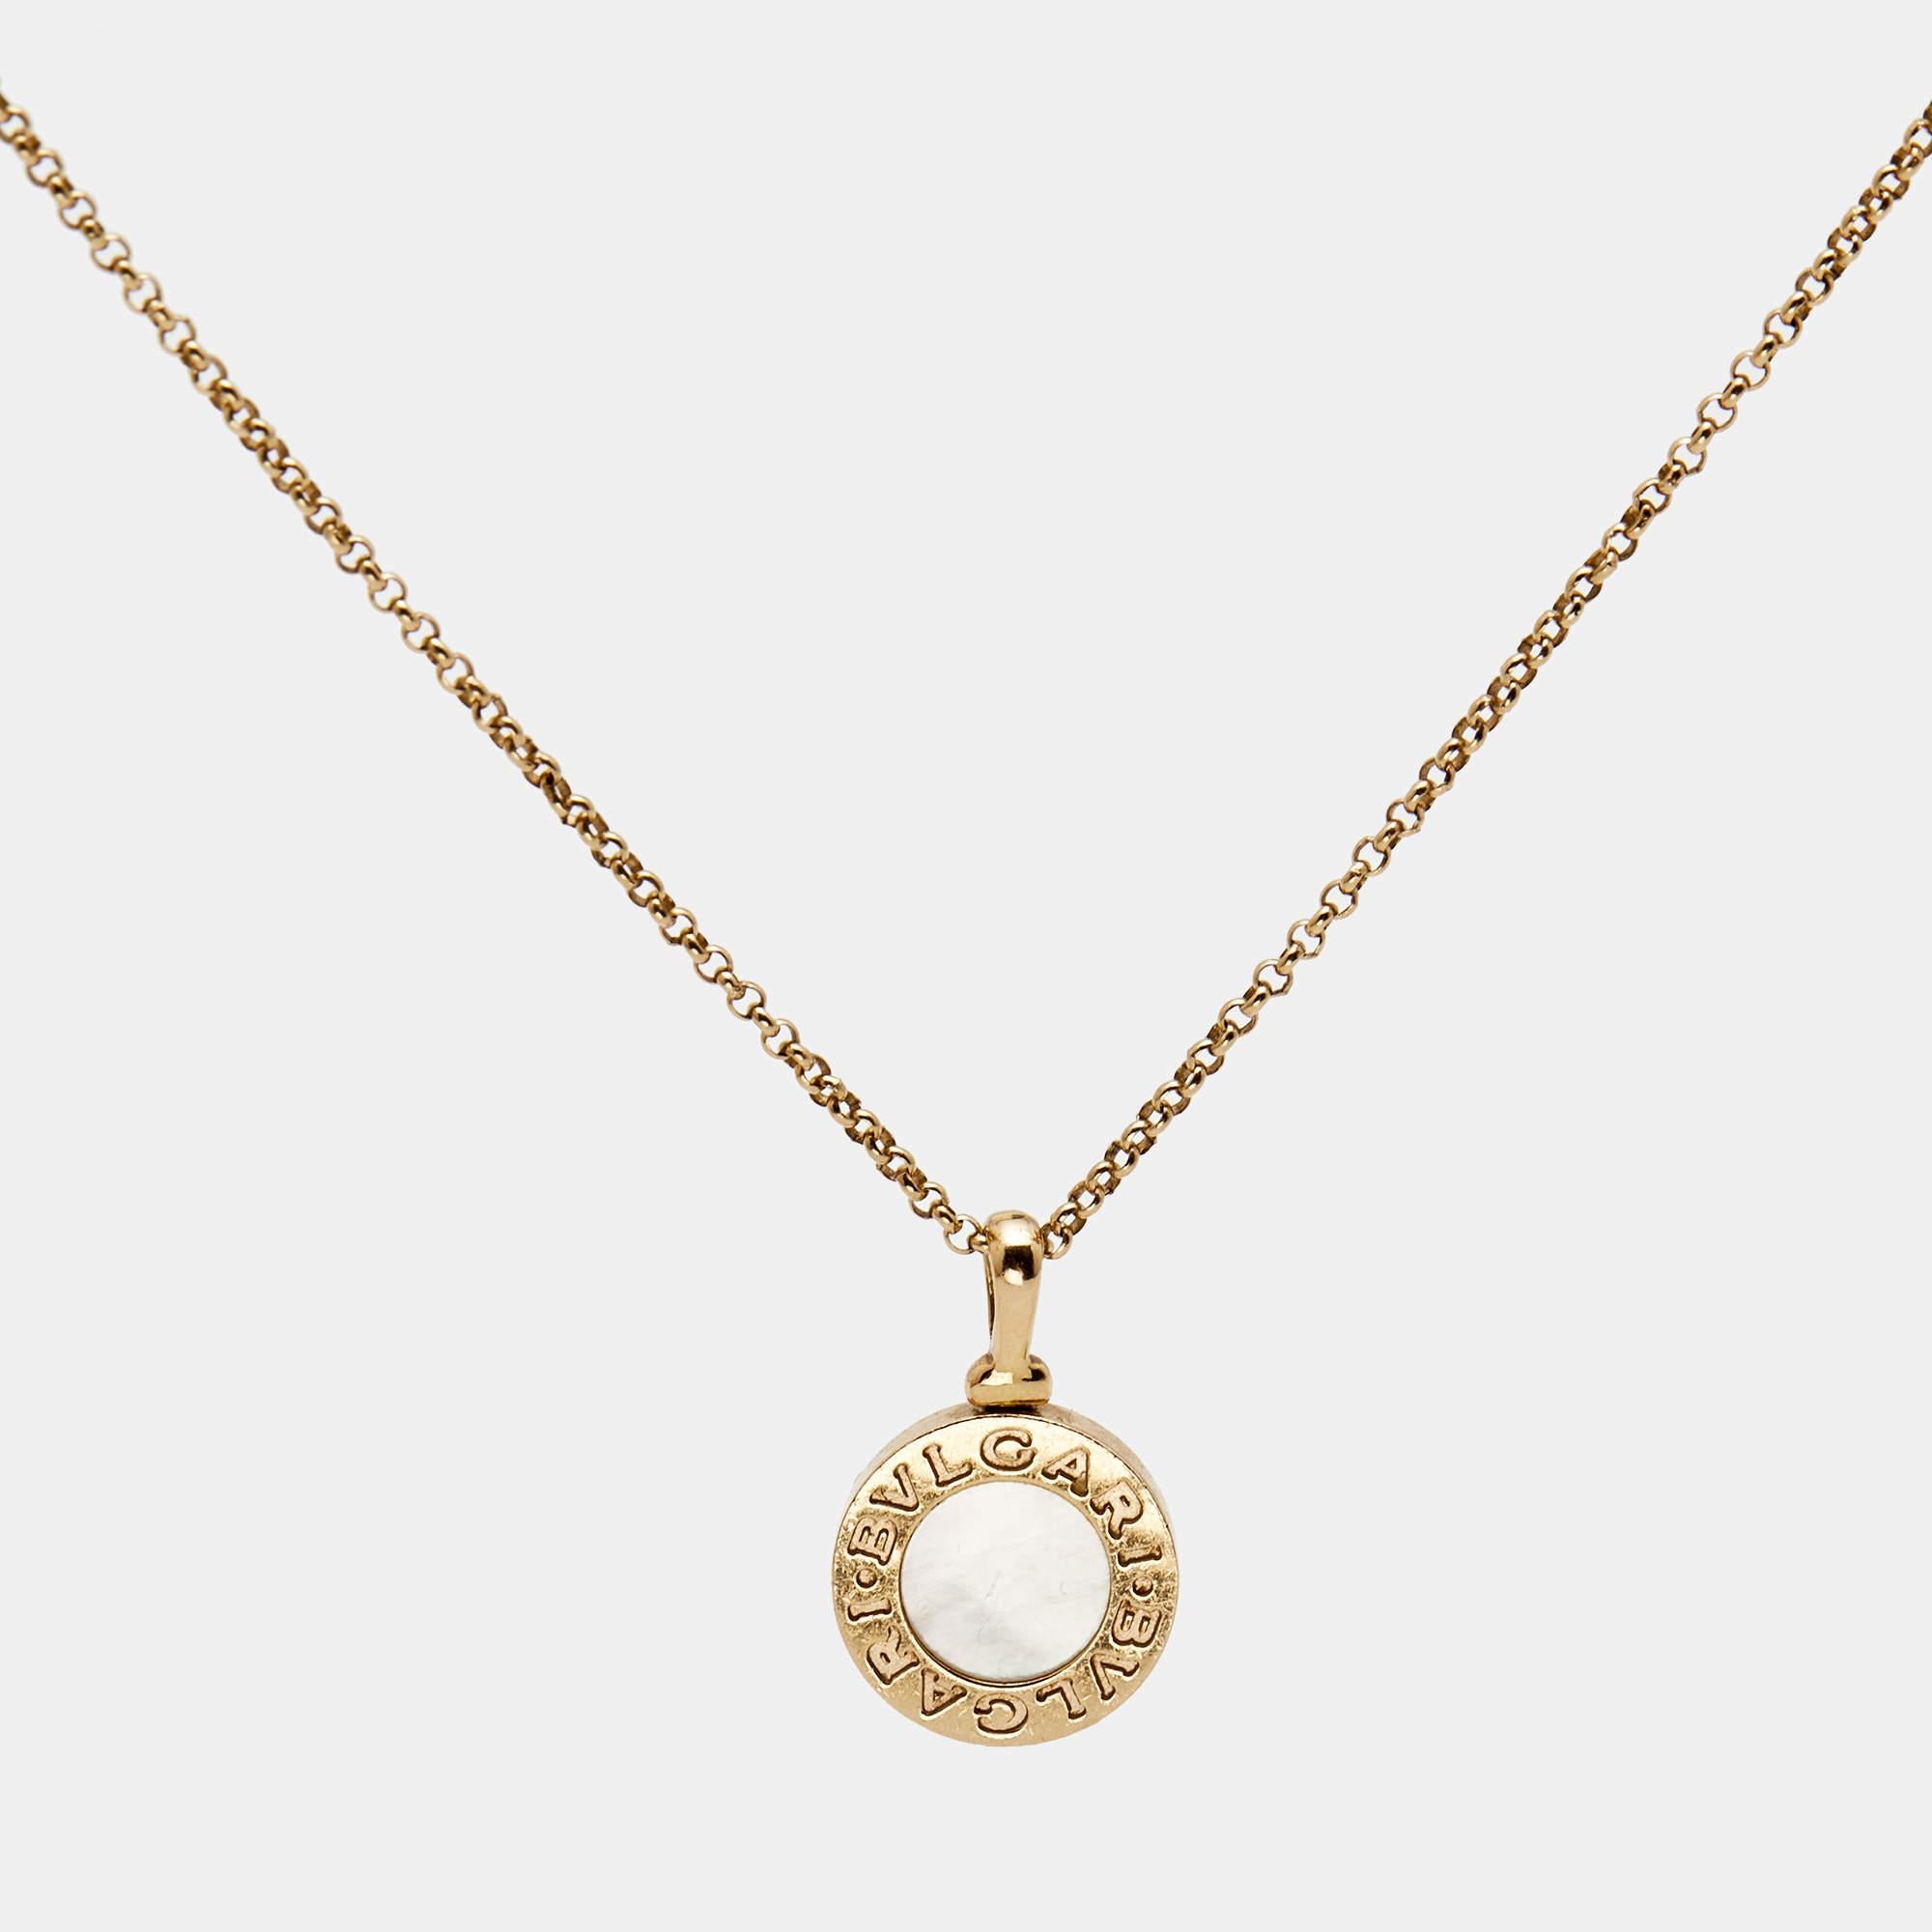 An elegant creation to adorn your neck beautifully, this designer necklace is created with attention to detail. It is rendered from best materials to last your from season to season and will be a standout piece in your wardrobe.

